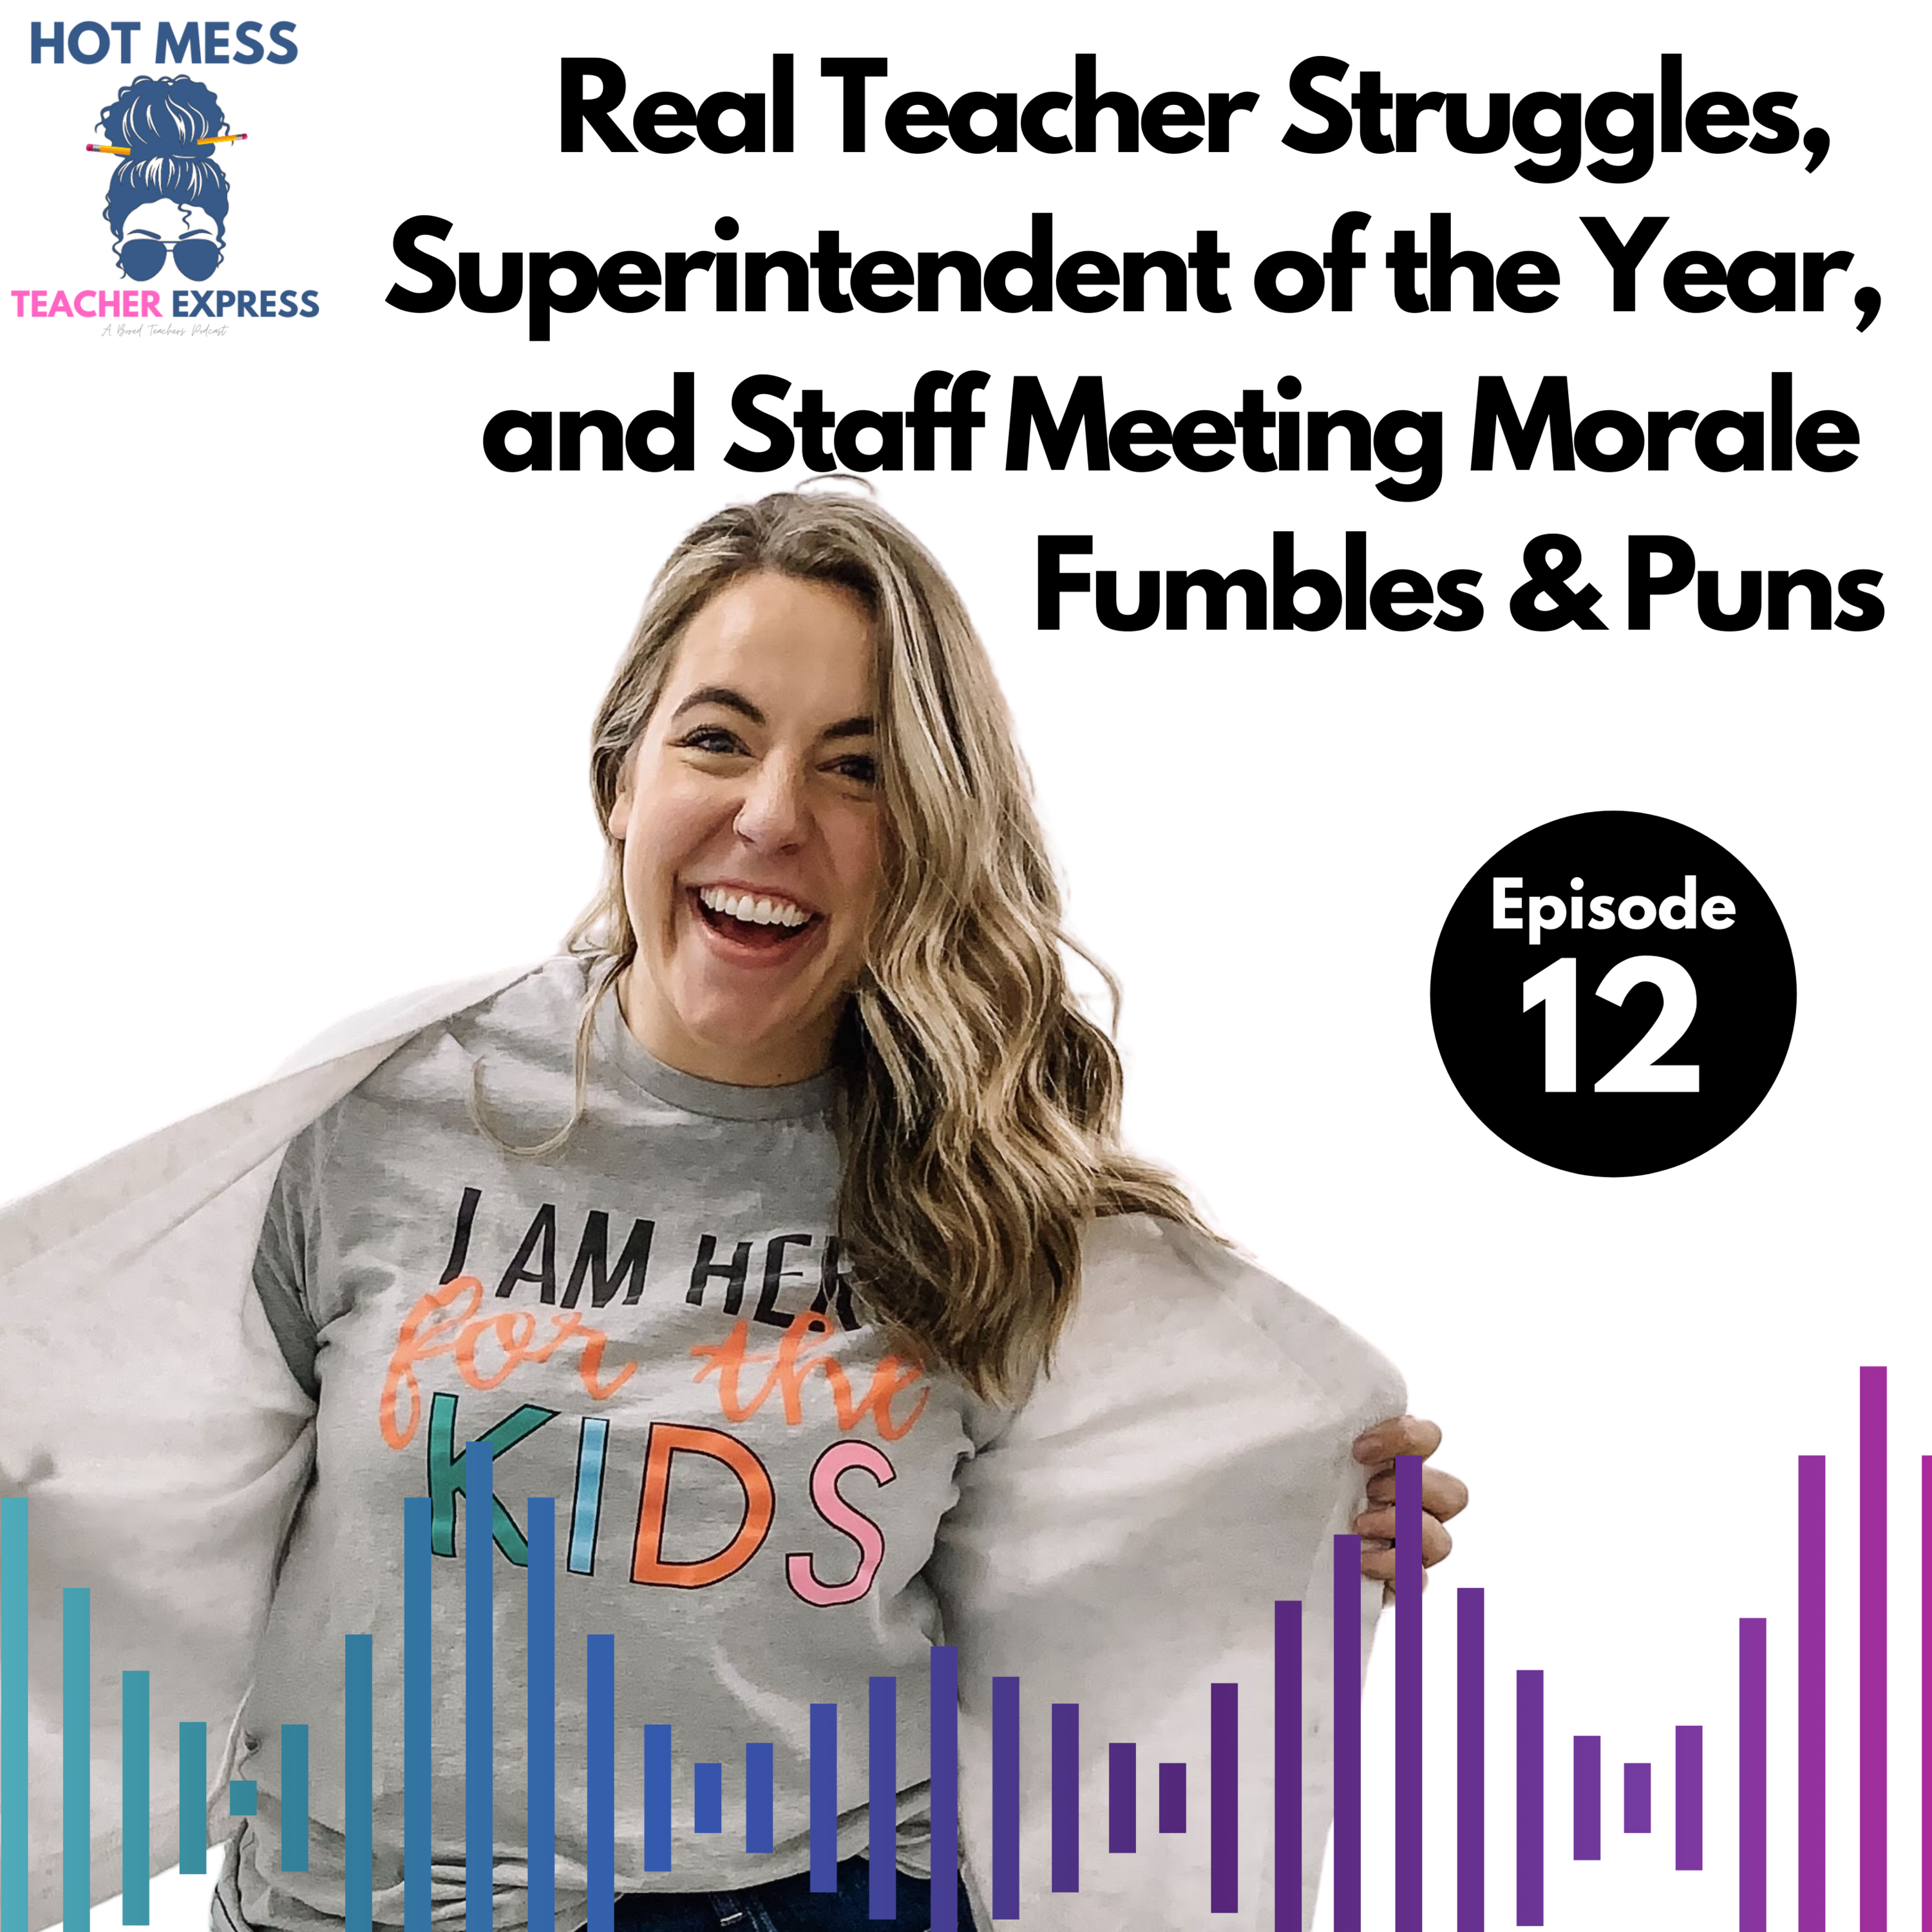 Episode #12 - Messages from Real Teachers Struggling This Year, the Superintendent of the Year, and Staff Meeting Morale Fumbles & Puns